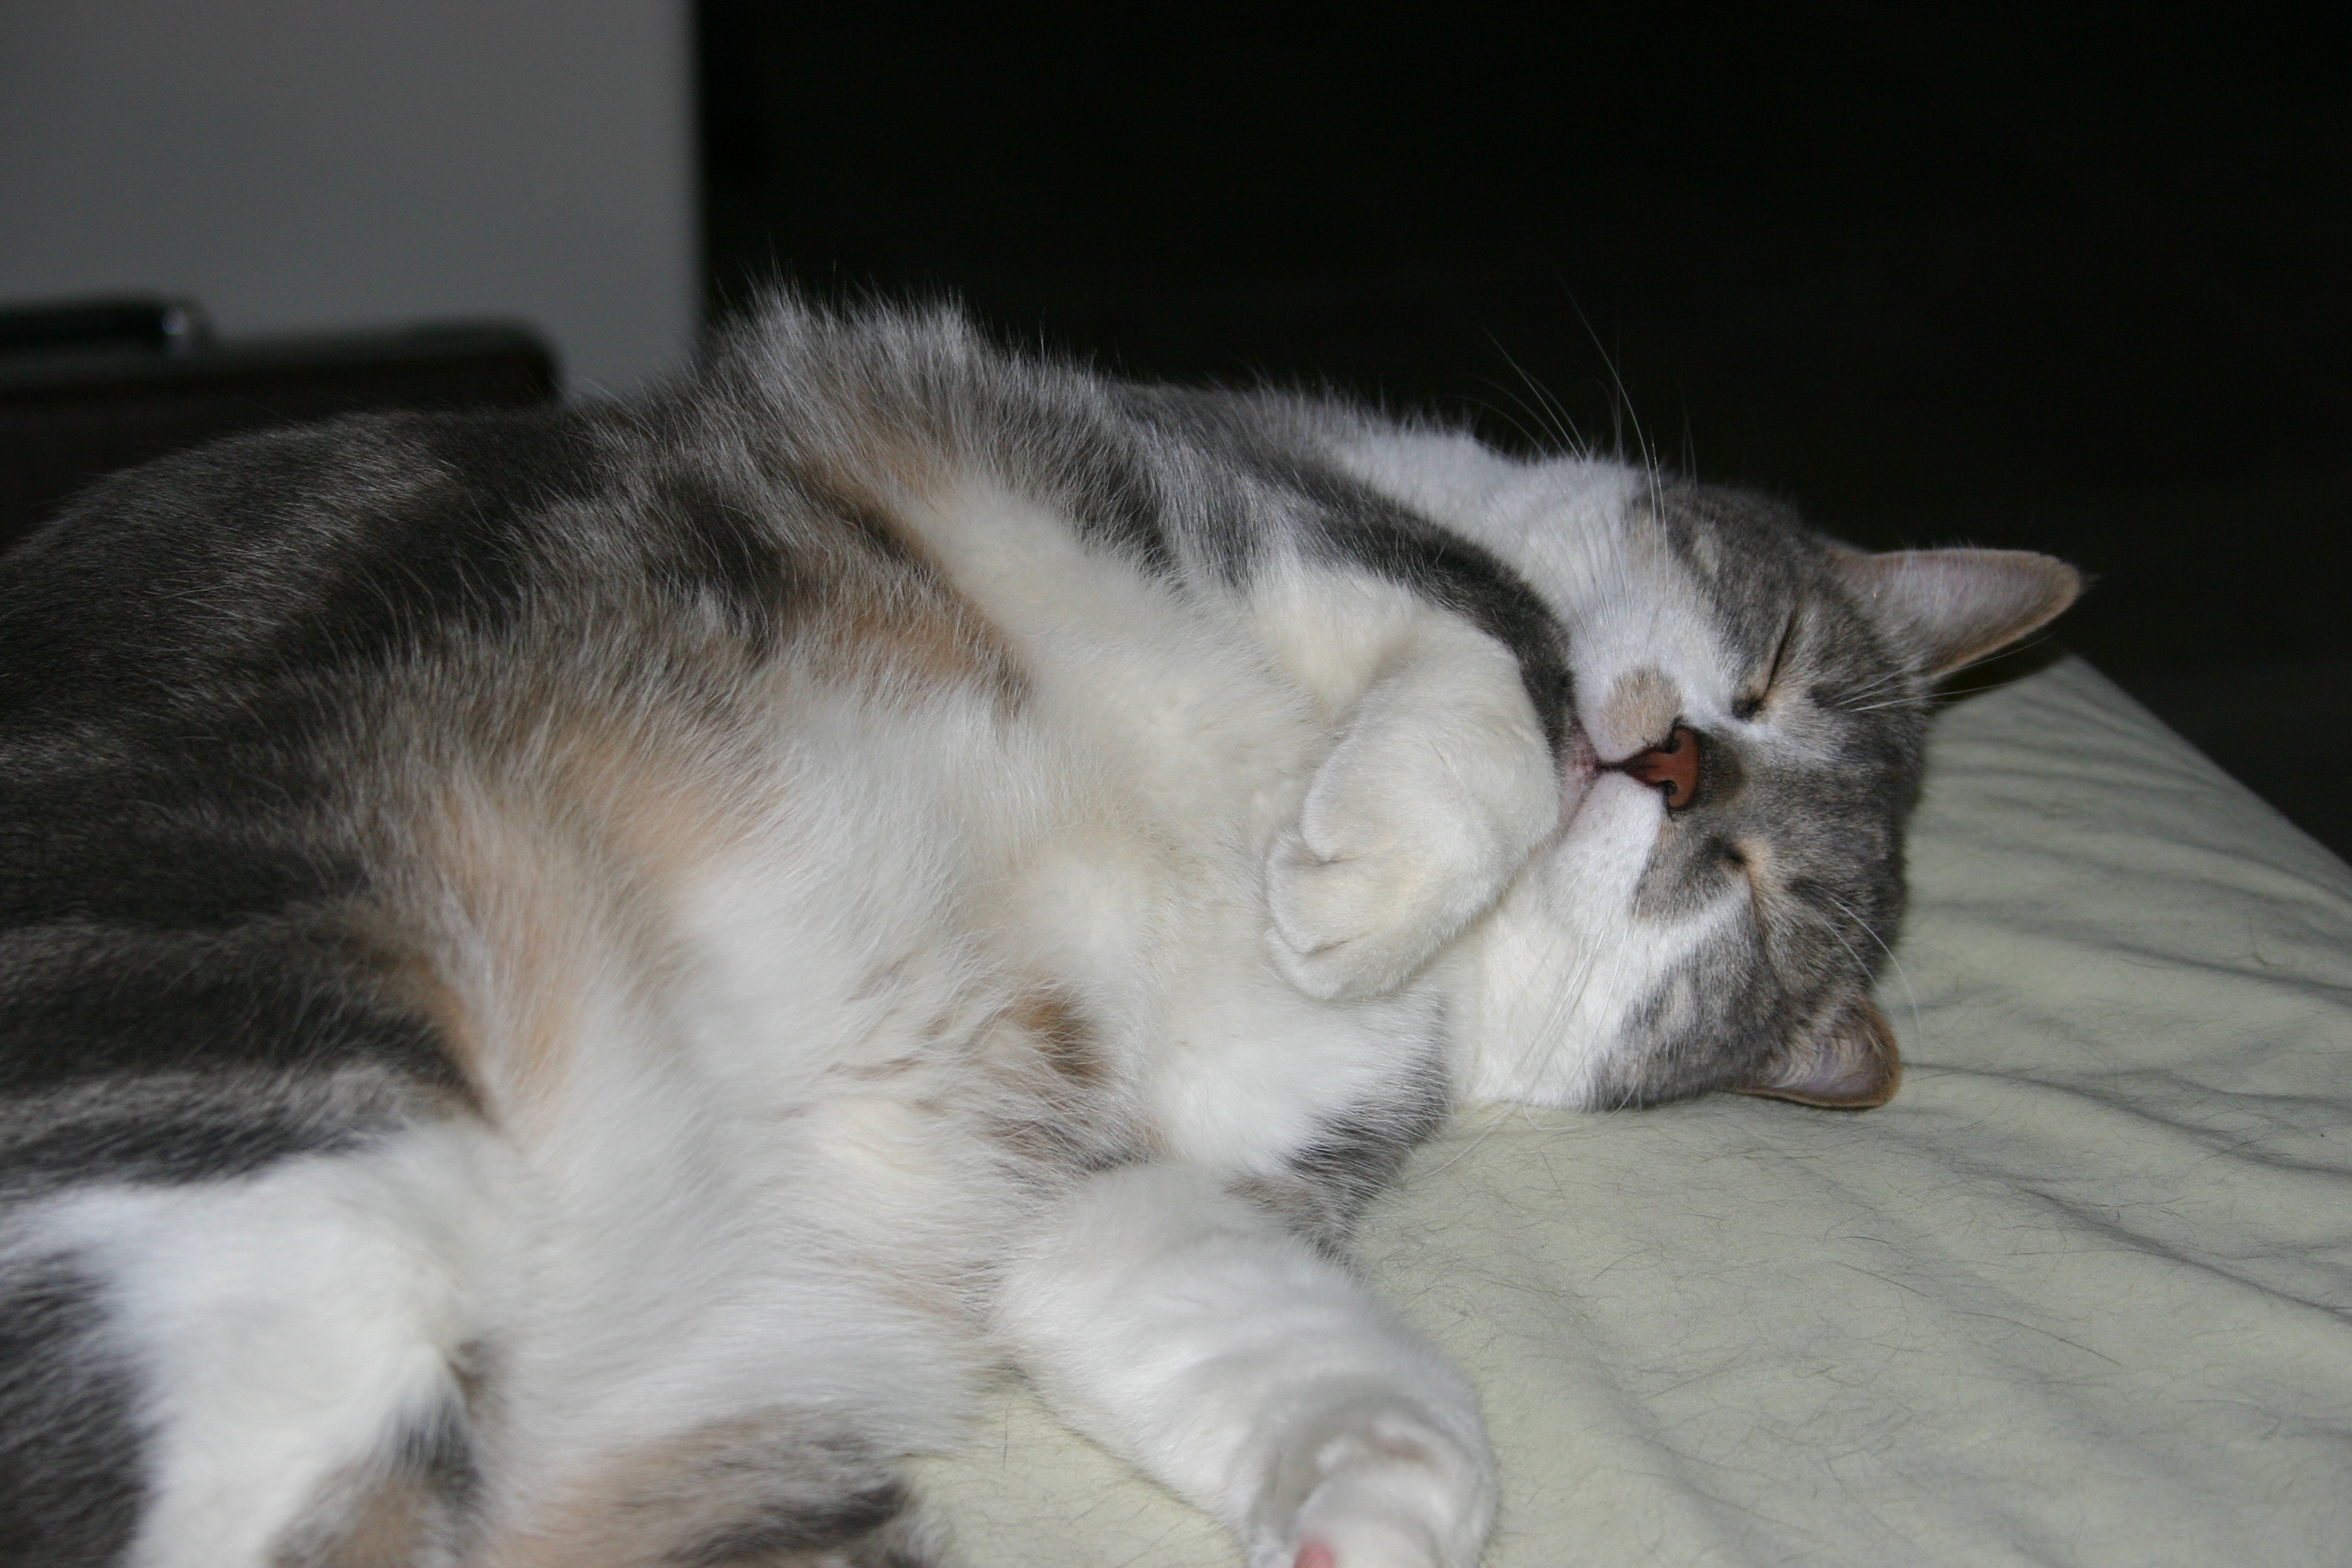 A lazy gray-and-white cat naps blissfully.